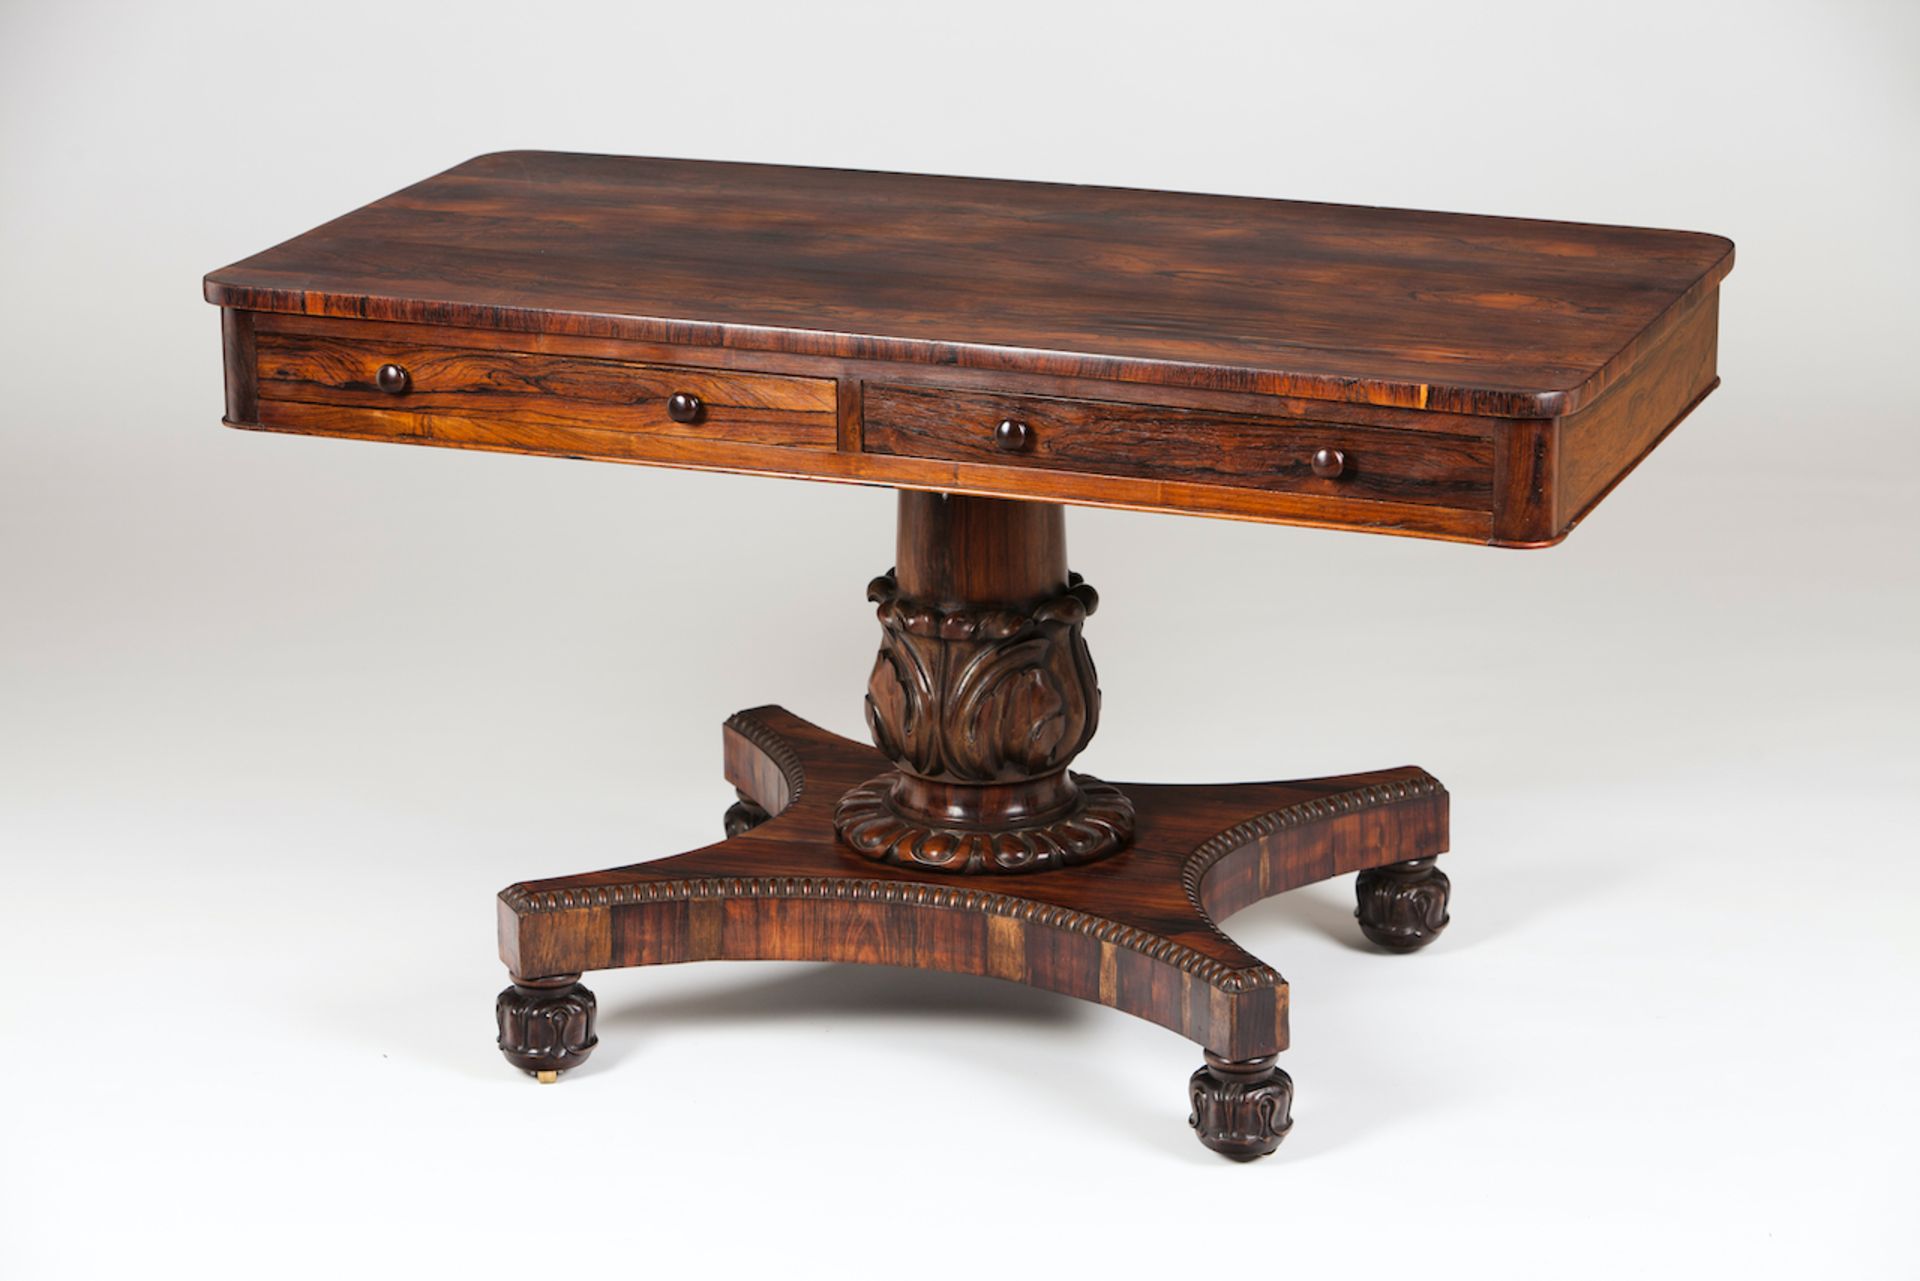 A William IV sofa-tableRosewood and rosewood veneerTwo drawers simulating fourCarved foliage